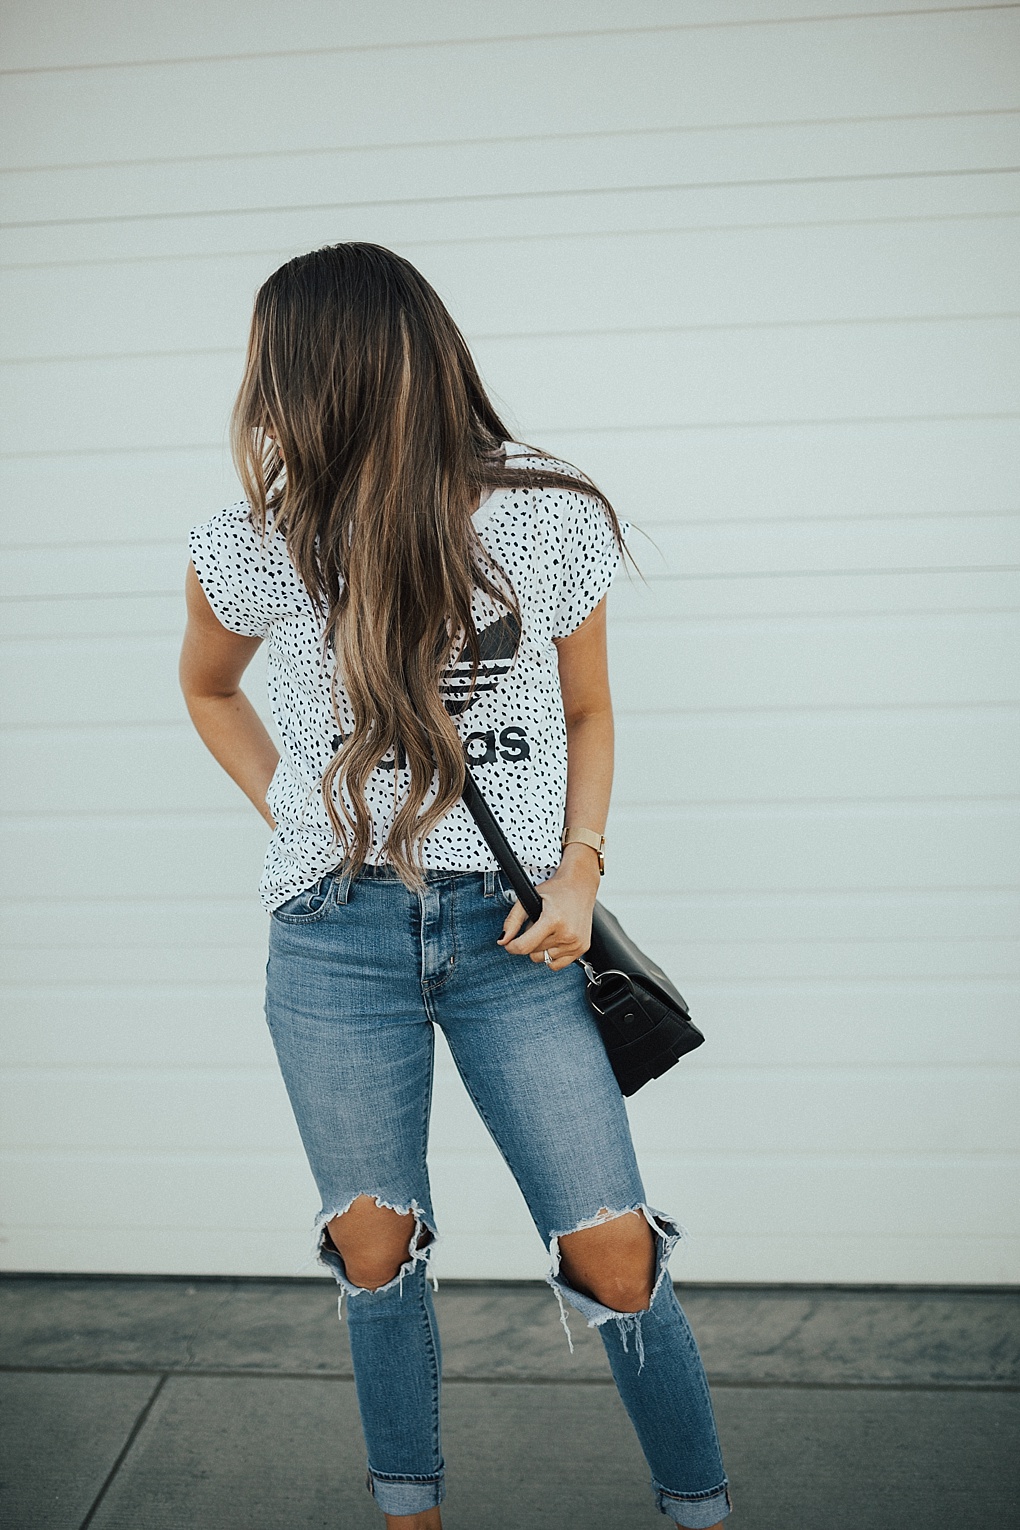 3 Must Have Momiform Pieces: Oversized Tee, Denim & Loafers by Utah fashion blogger Dani Marie